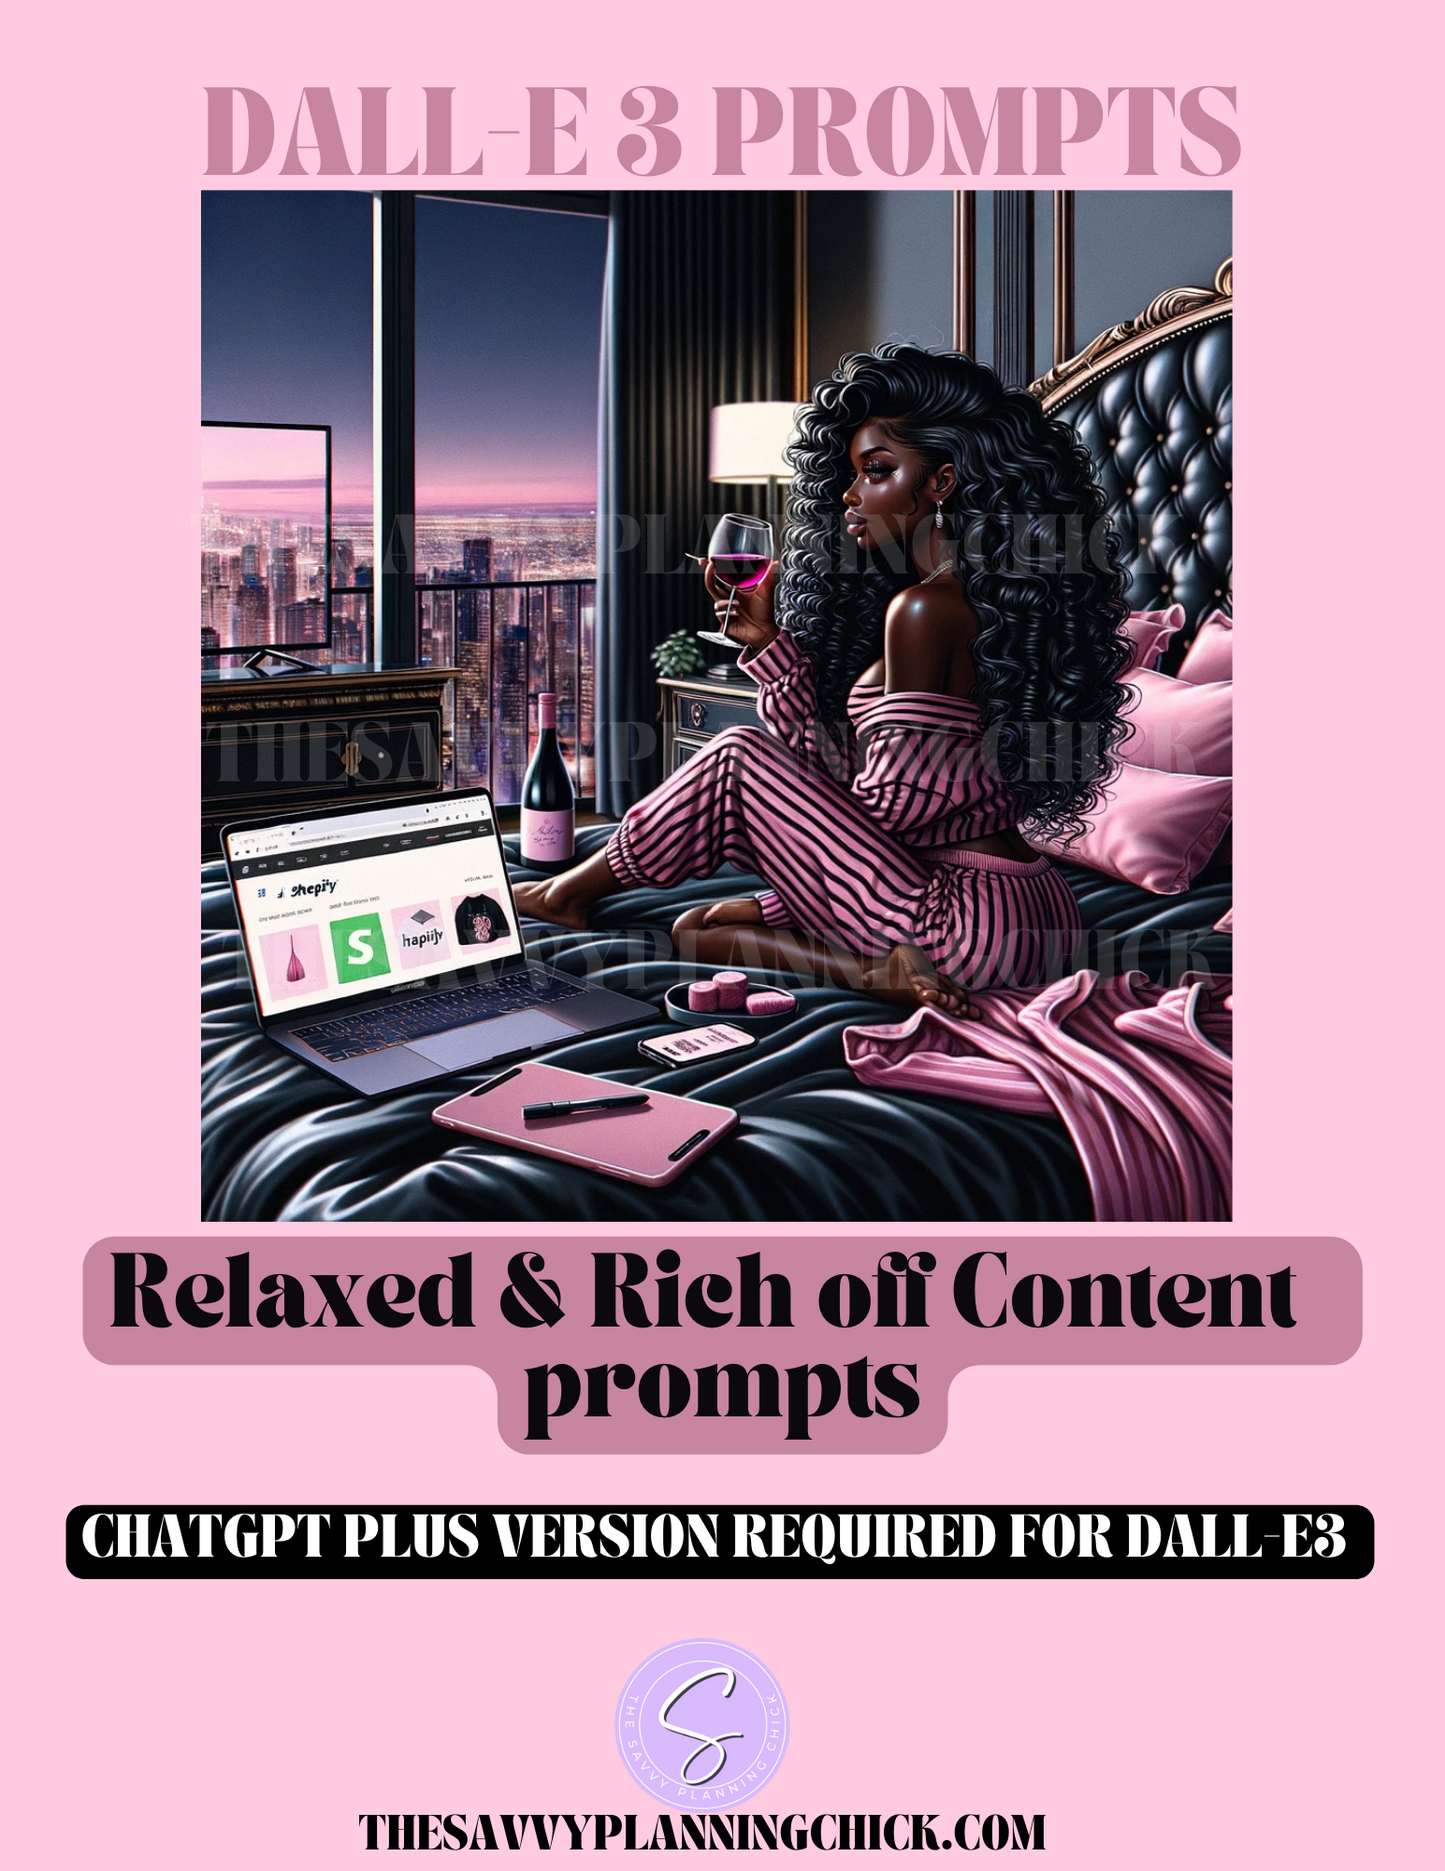 Relaxed & Rich off Content DALL-3 PROMPTS